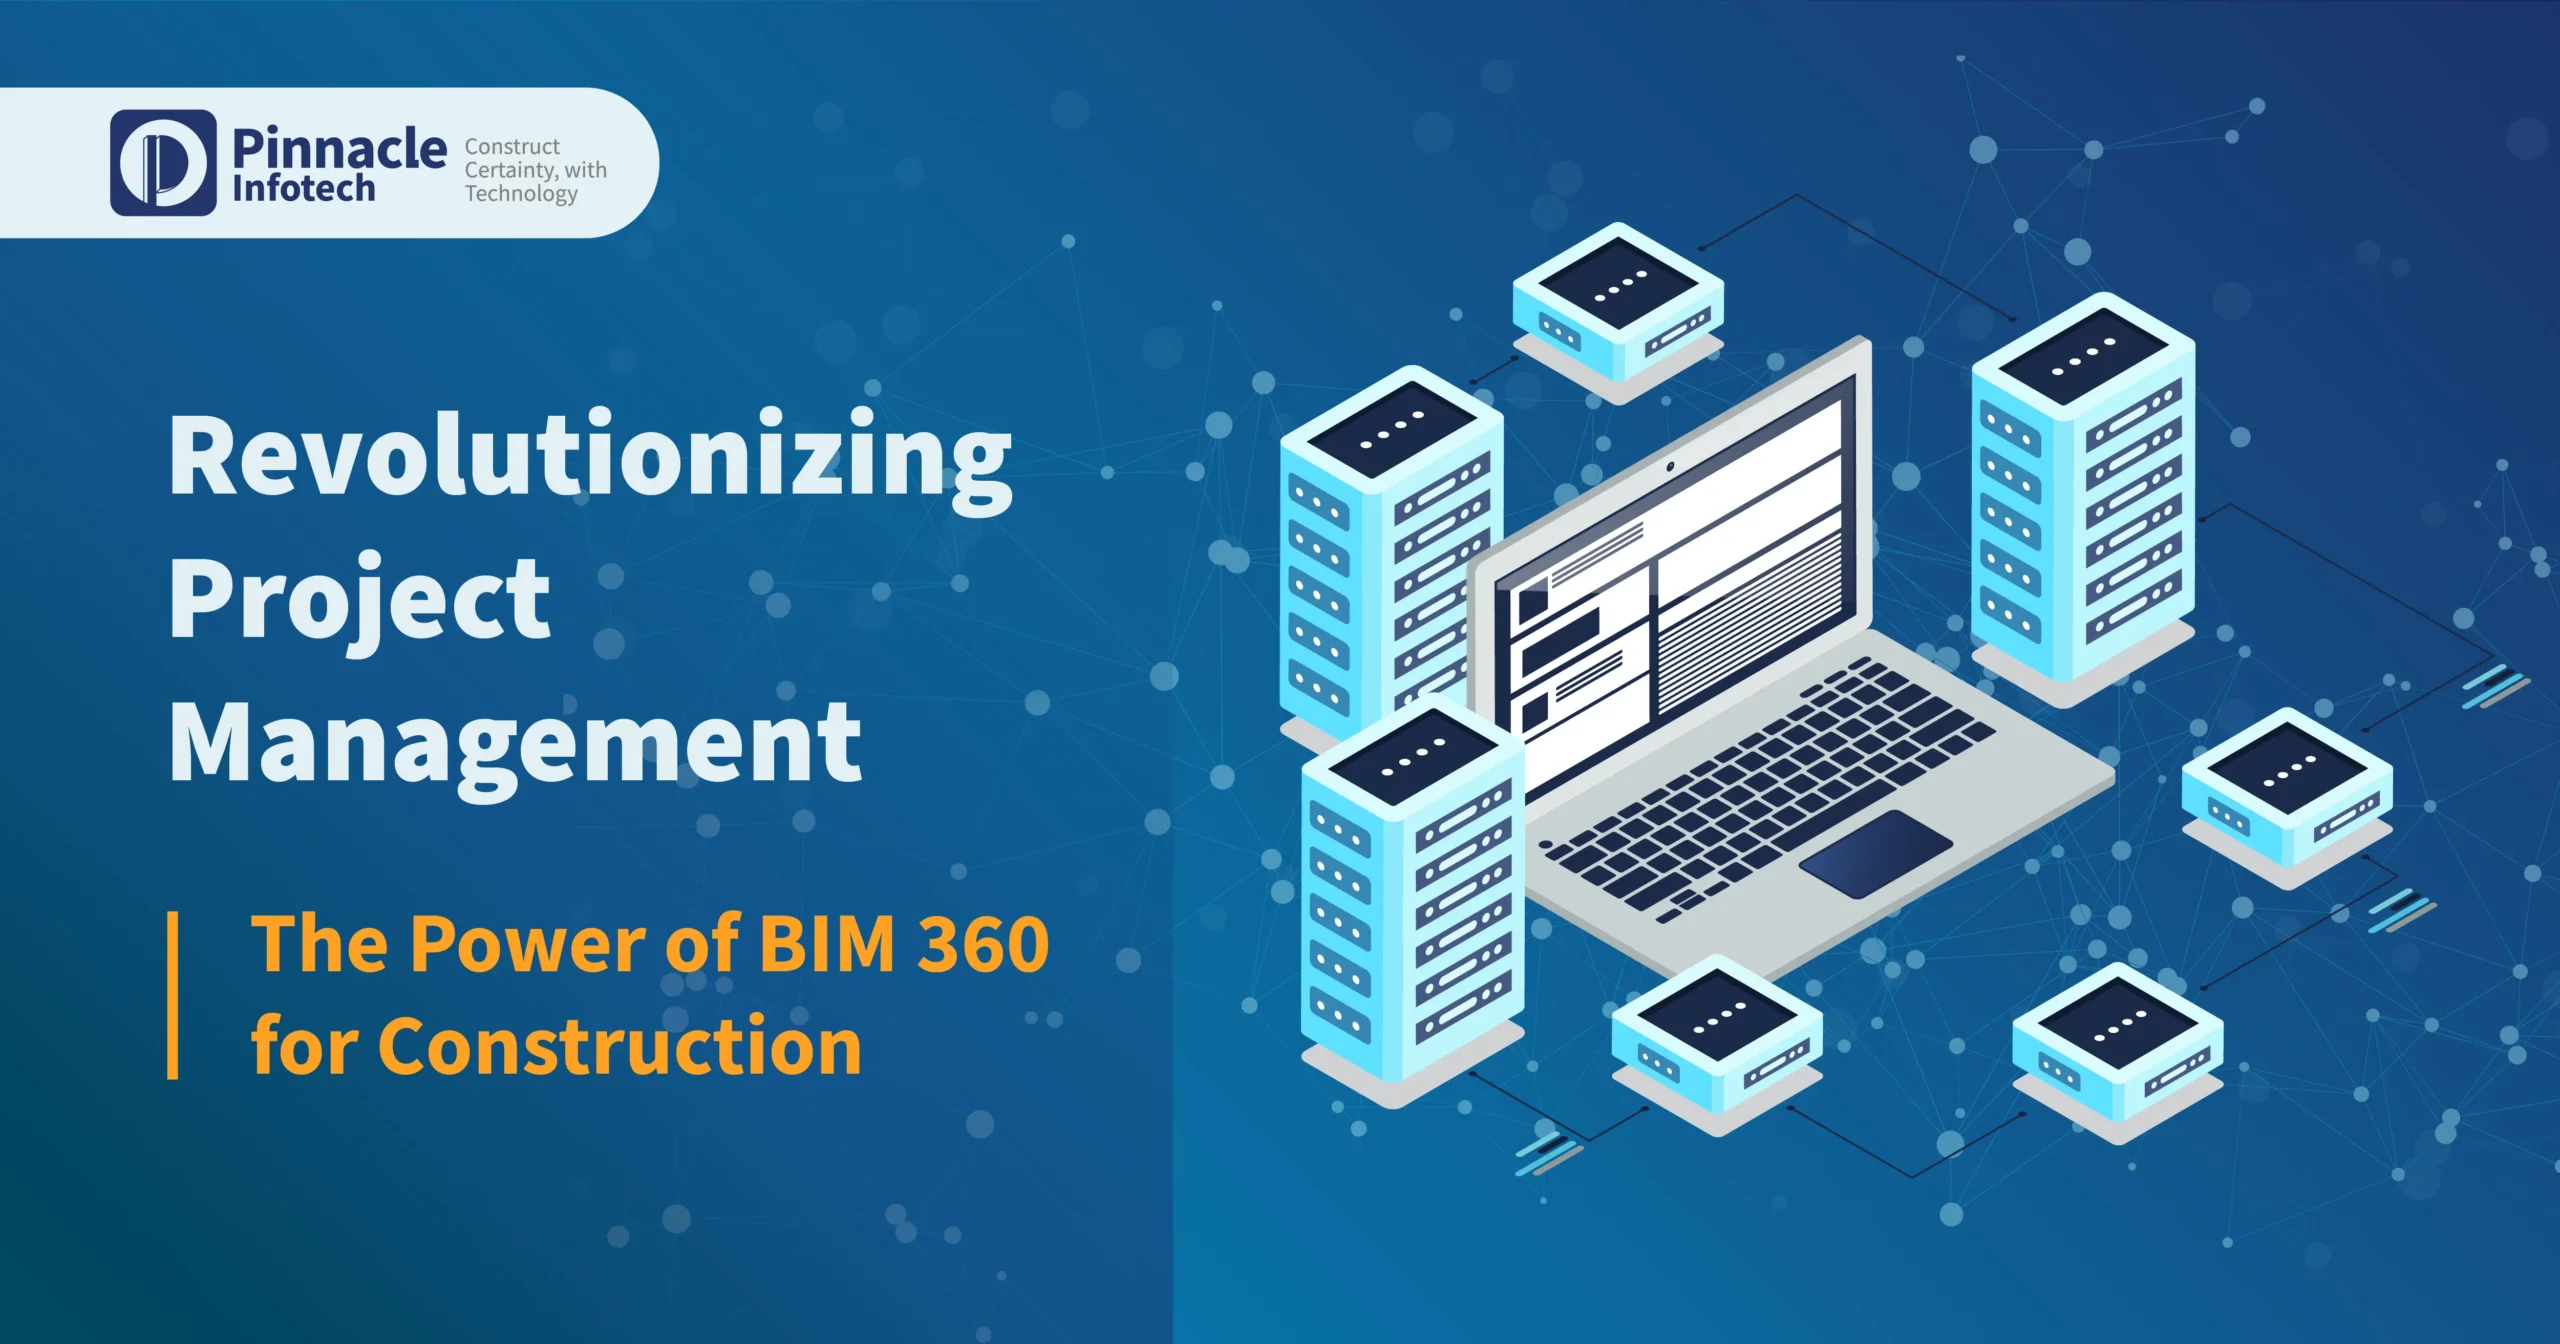 Isometric illustration of laptops connected to documents and building models with text ‘Revolutionizing Project Management - The Power of BIM 360 for Construction’ by Pinnacle Infotech